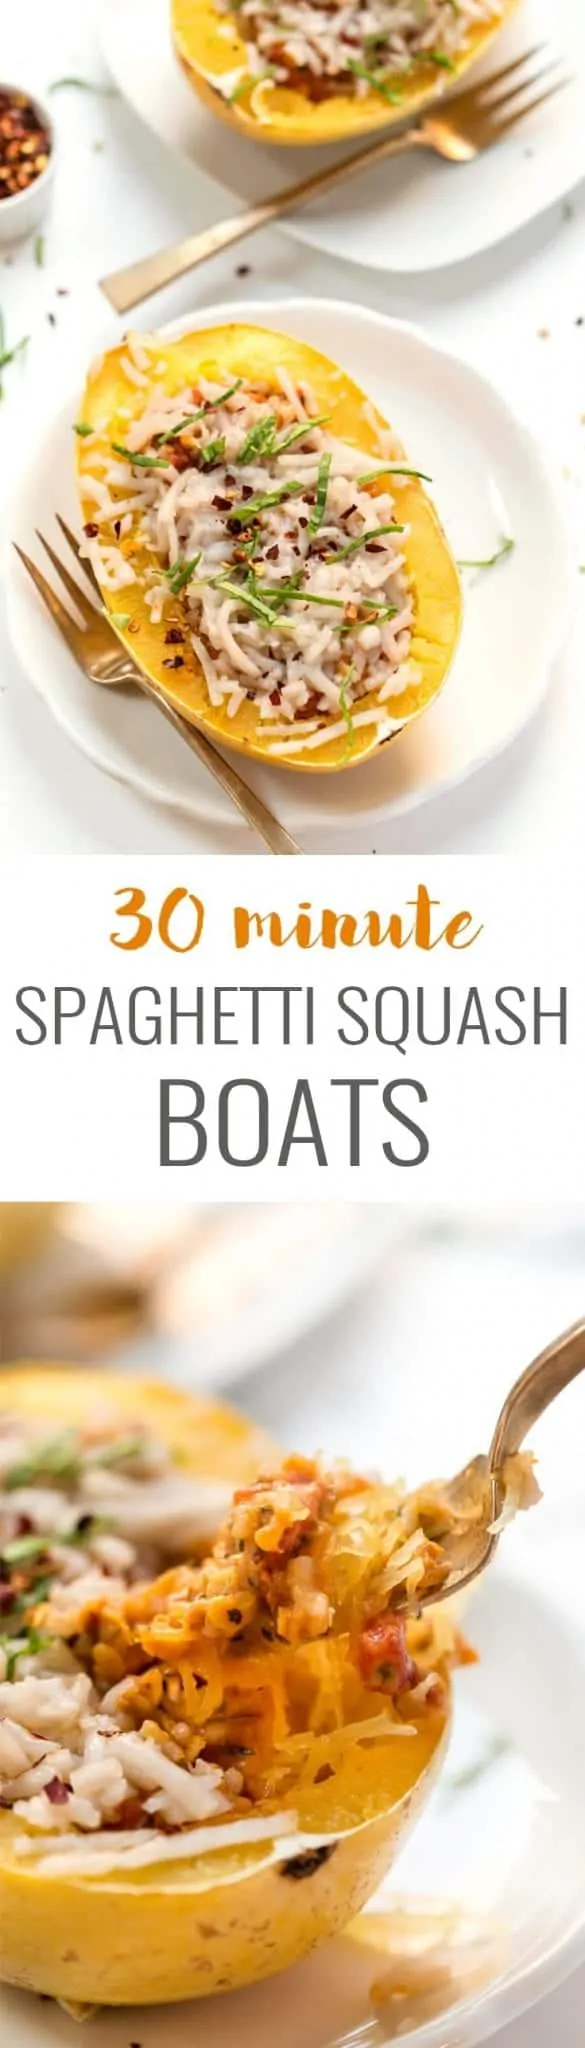 Vegetarian Spaghetti Squash Boats -- super healthy and ready in just 30 MINUTES ❤️ filled with a vegan bolognese sauce and topped with vegan cheese! #spaghettisquash #vegan